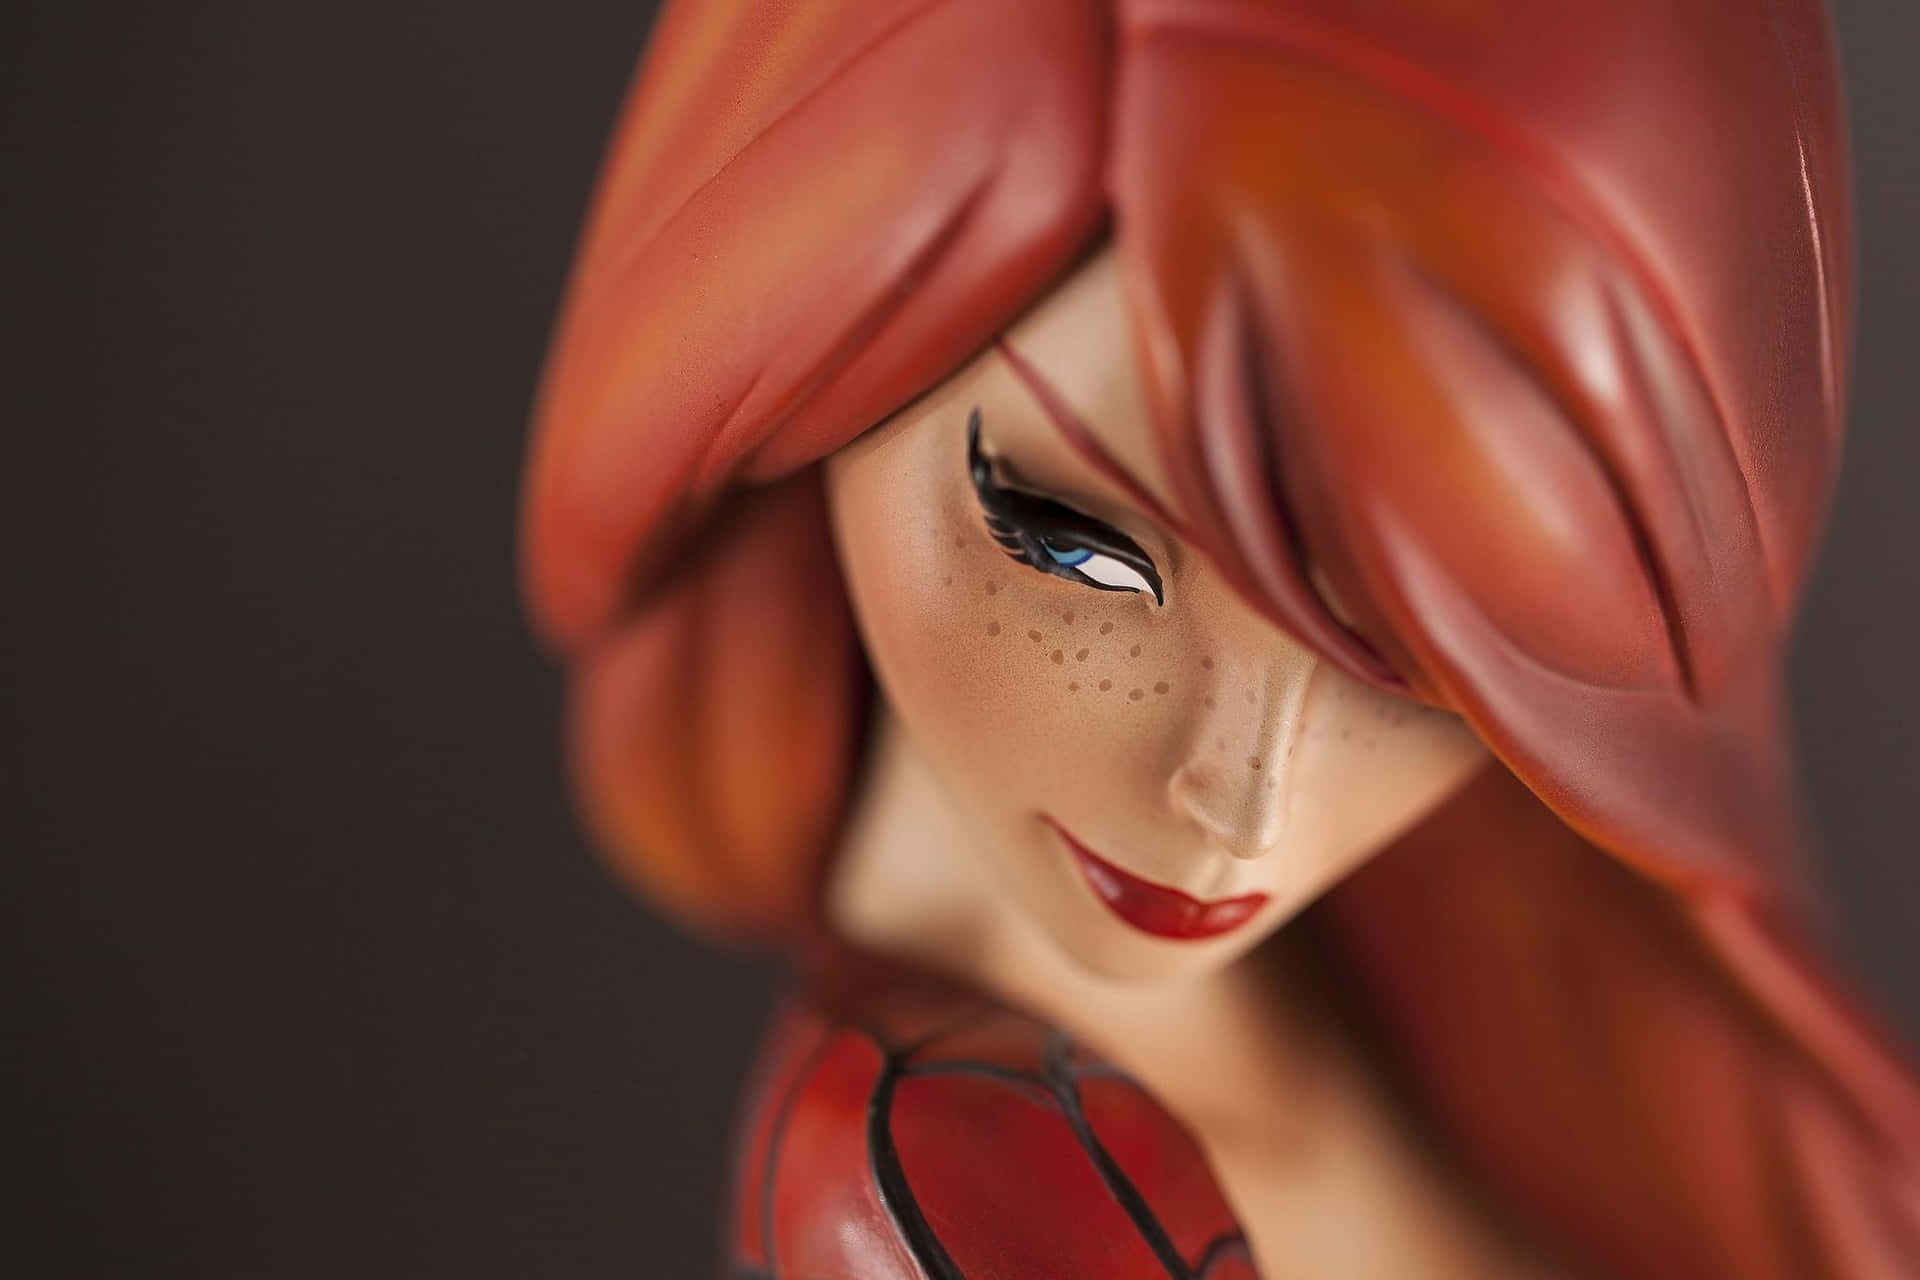 Marvel's Mary Jane Watson in a Contrasting World Wallpaper